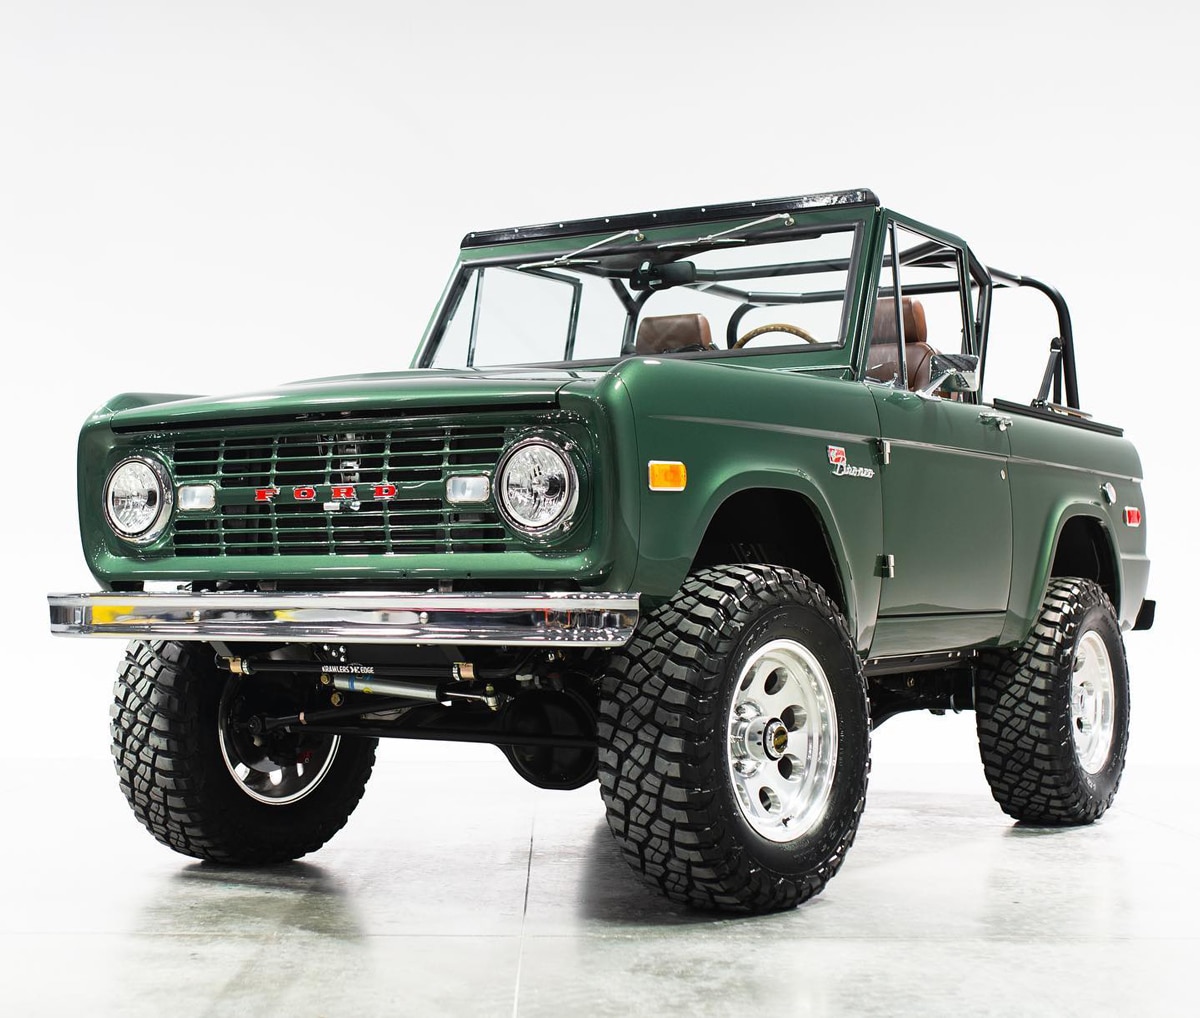 Augusta Green Bronco with King Ranch leather interior and Coyote V8 Engine